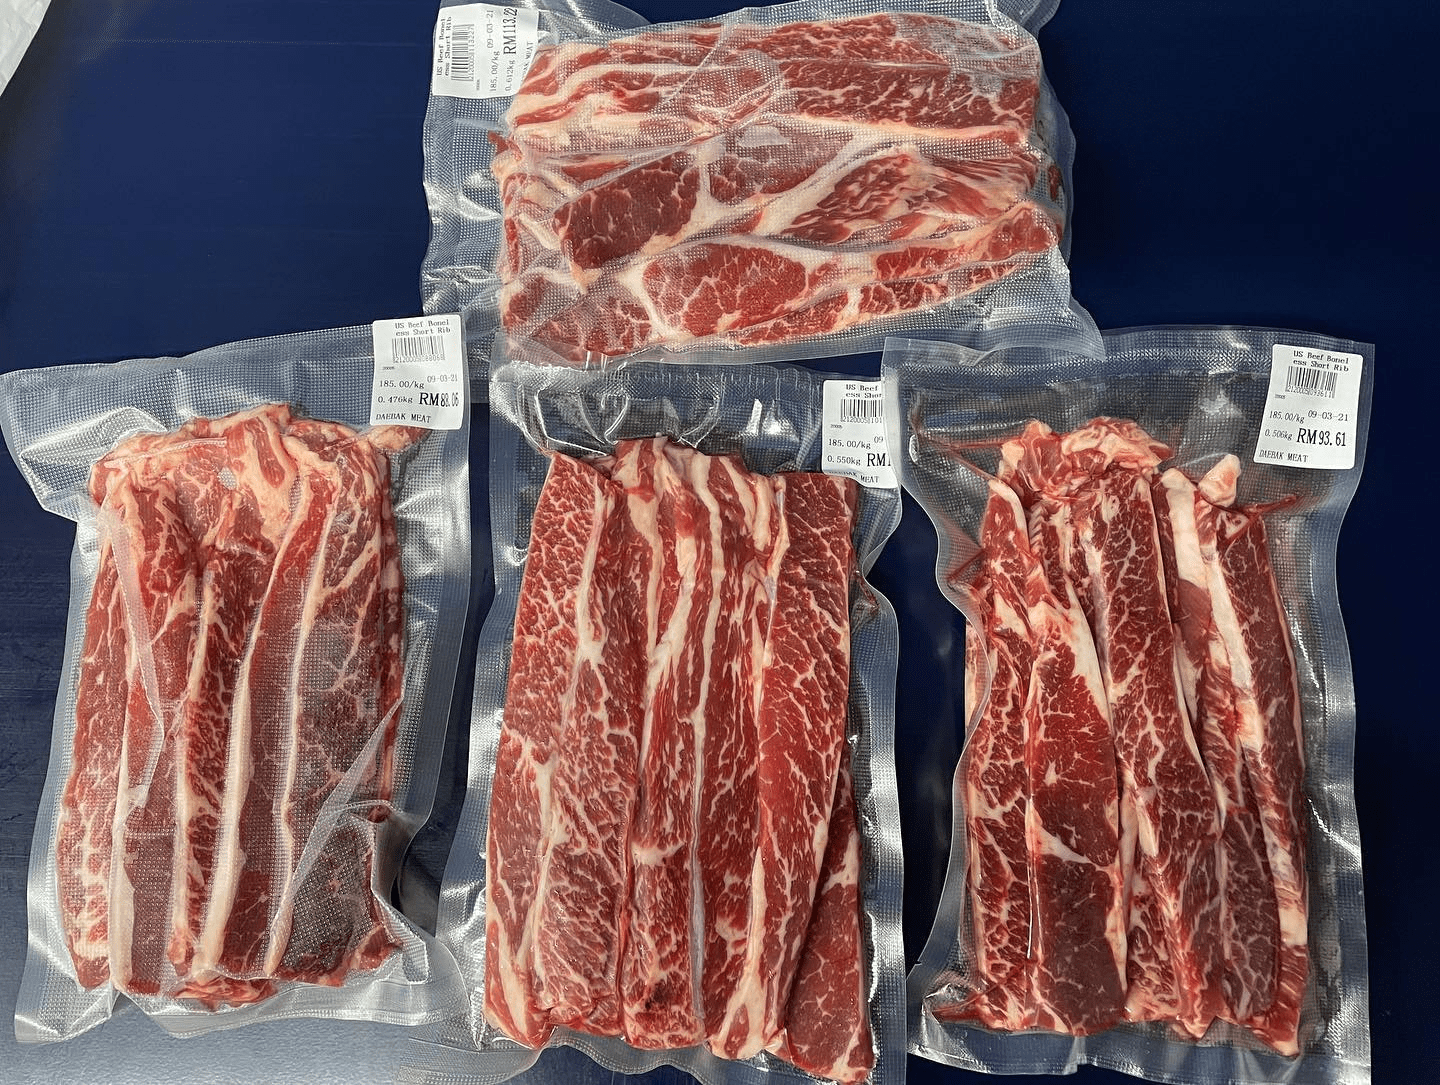 Korean grocery stores - meat cuts